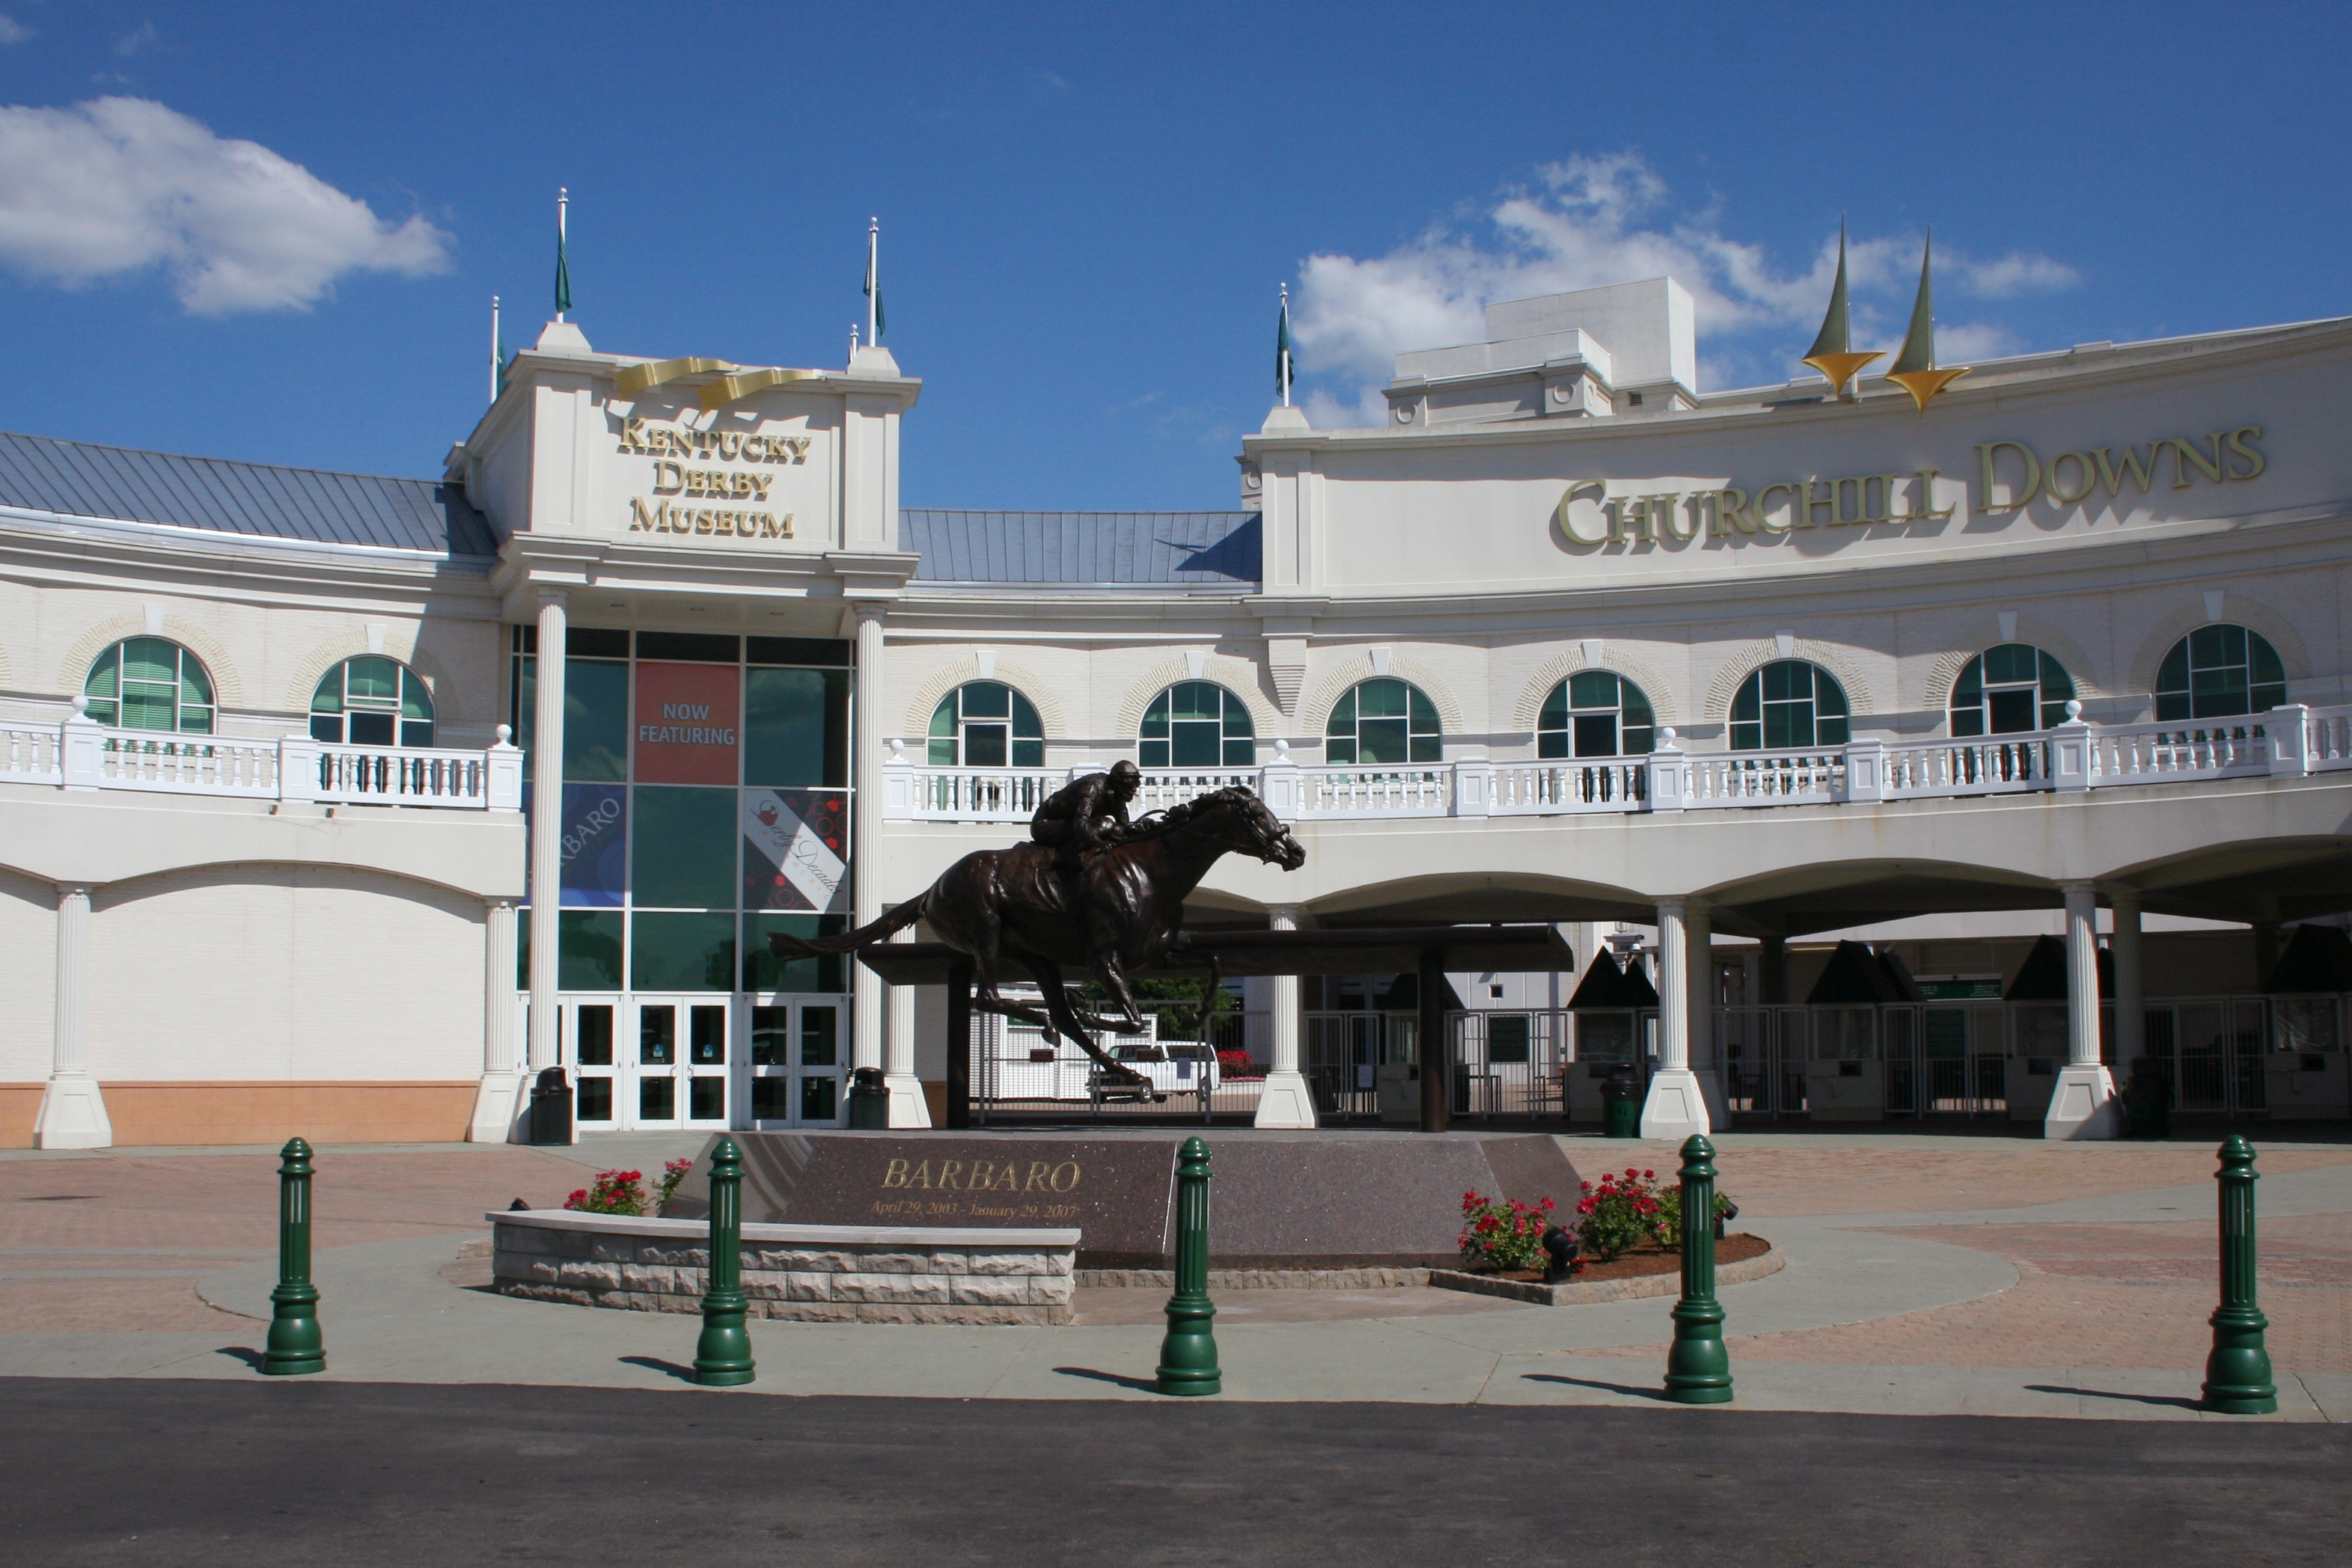 Entrances to Kentucky Derby Museum and Churchill Downs